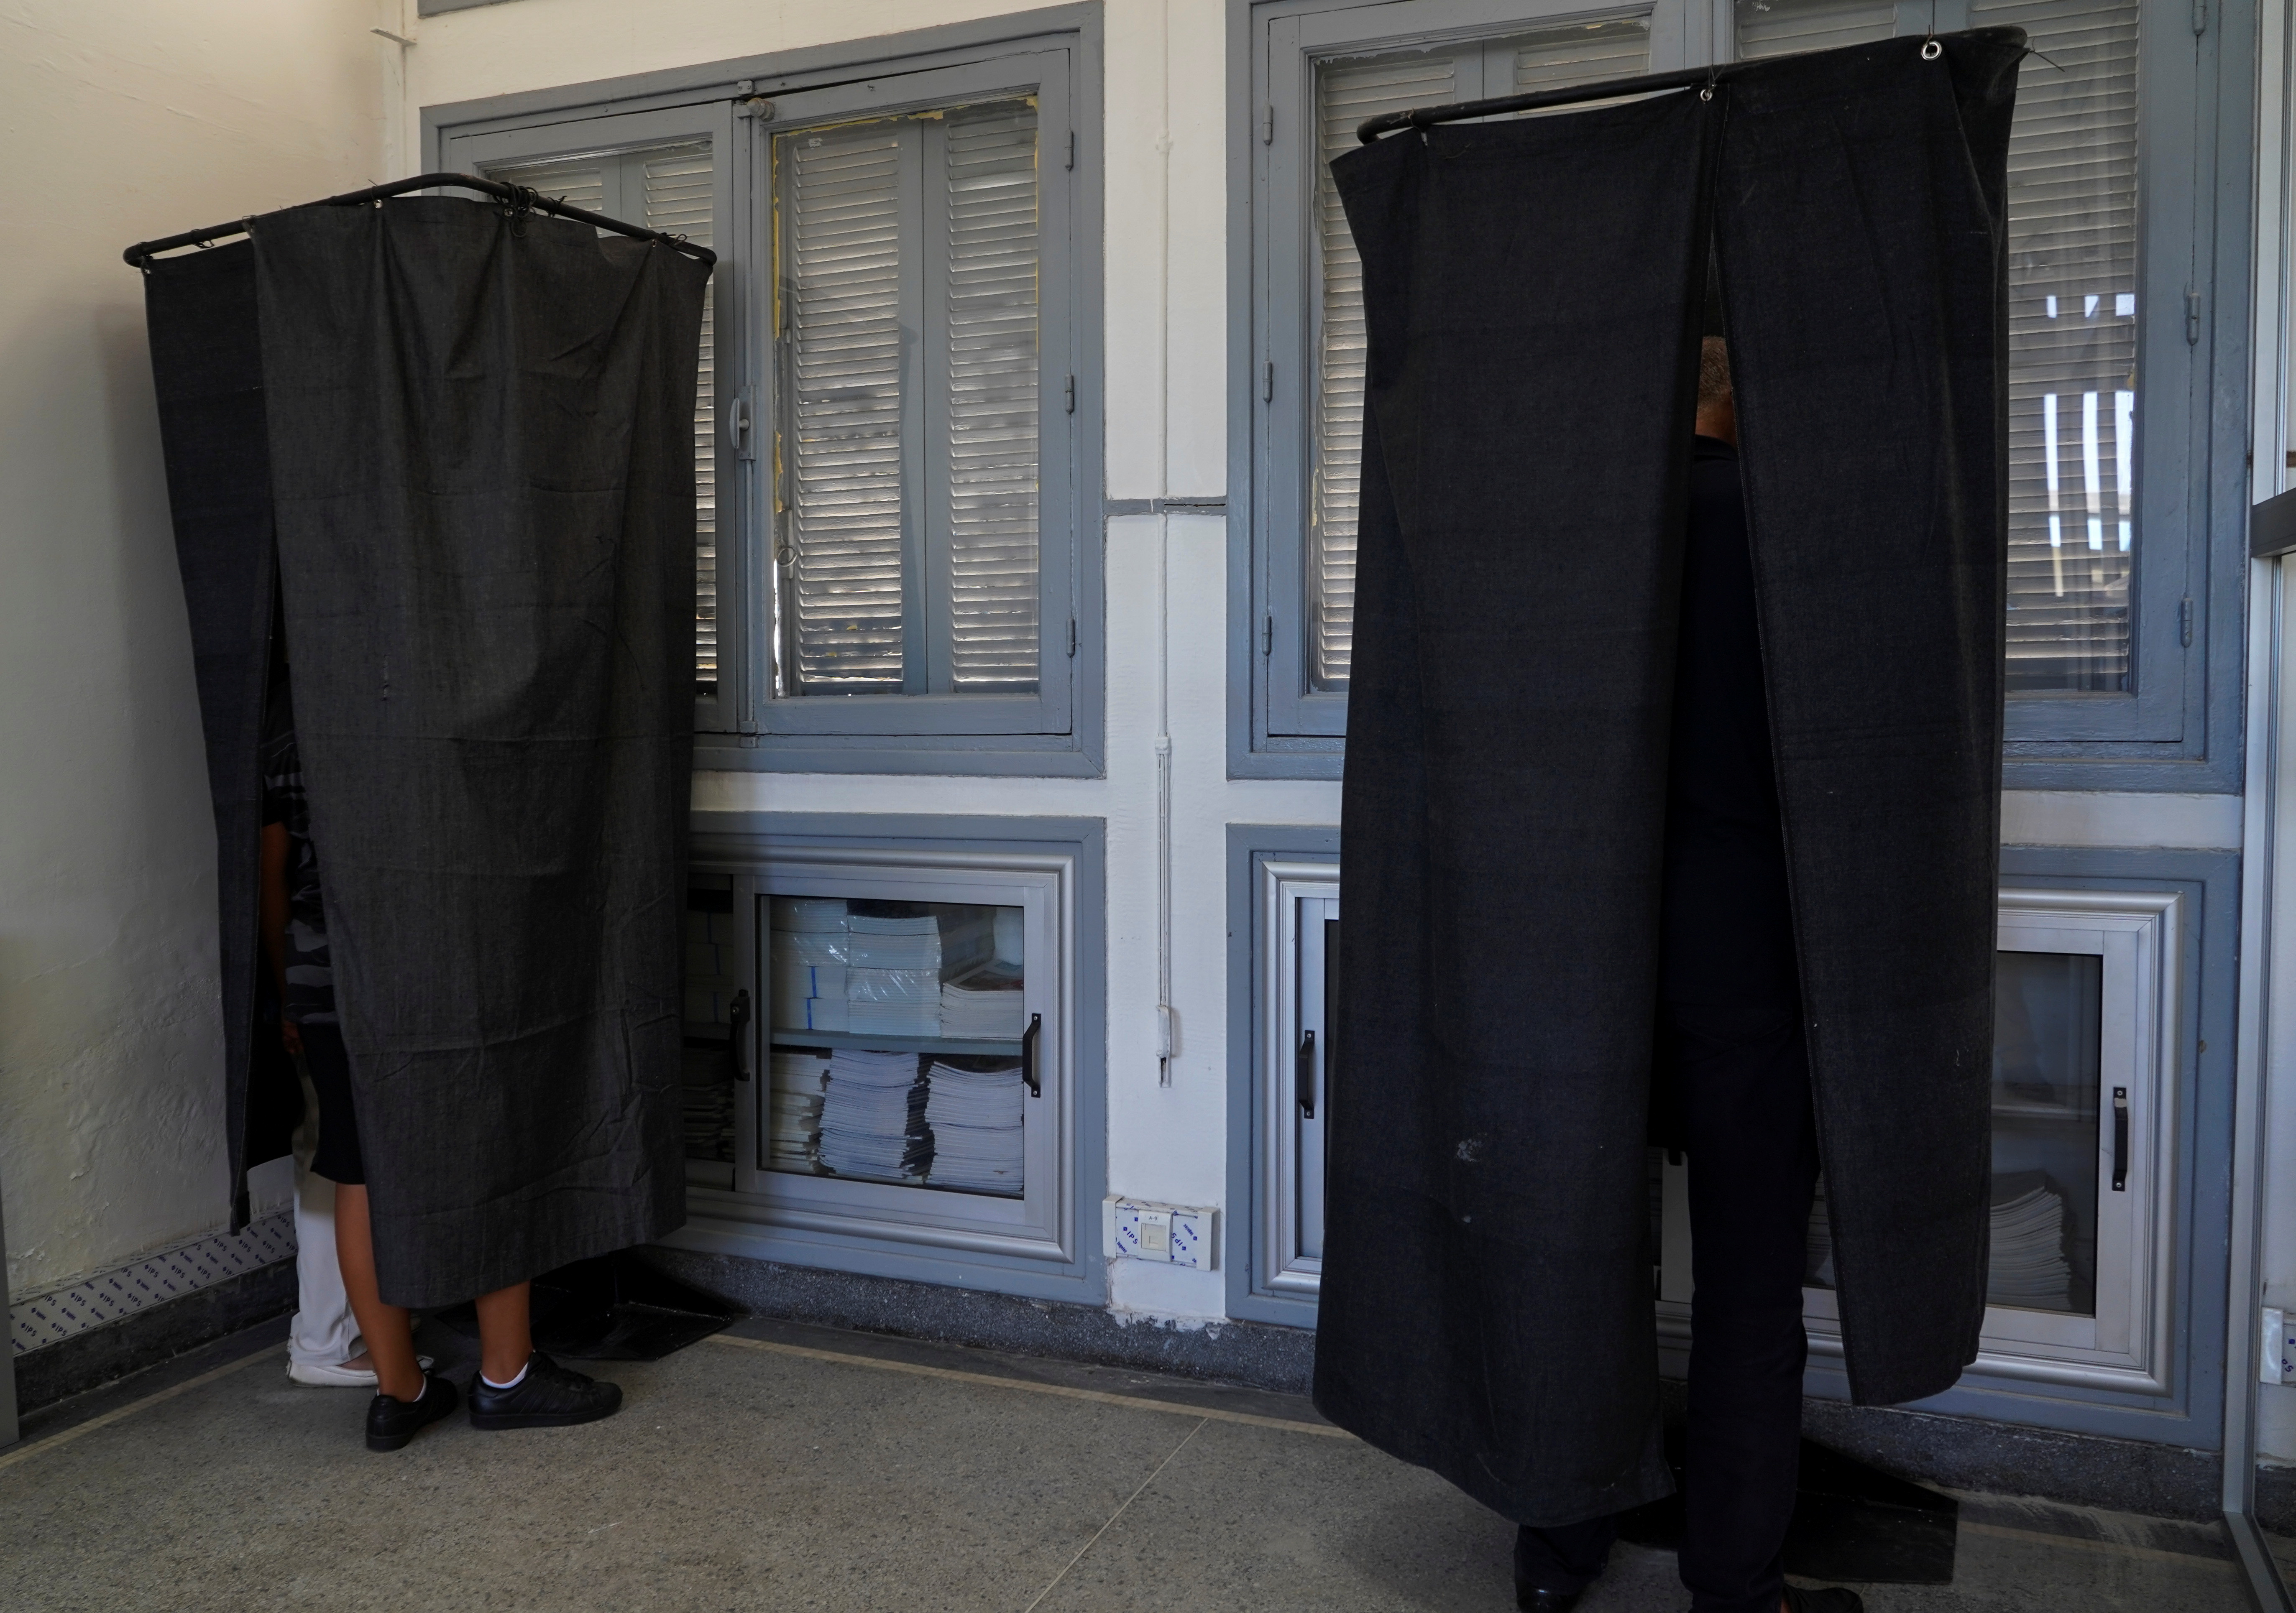 People stand behind curtains in voting booths during parliamentary and local elections, in Casablanca